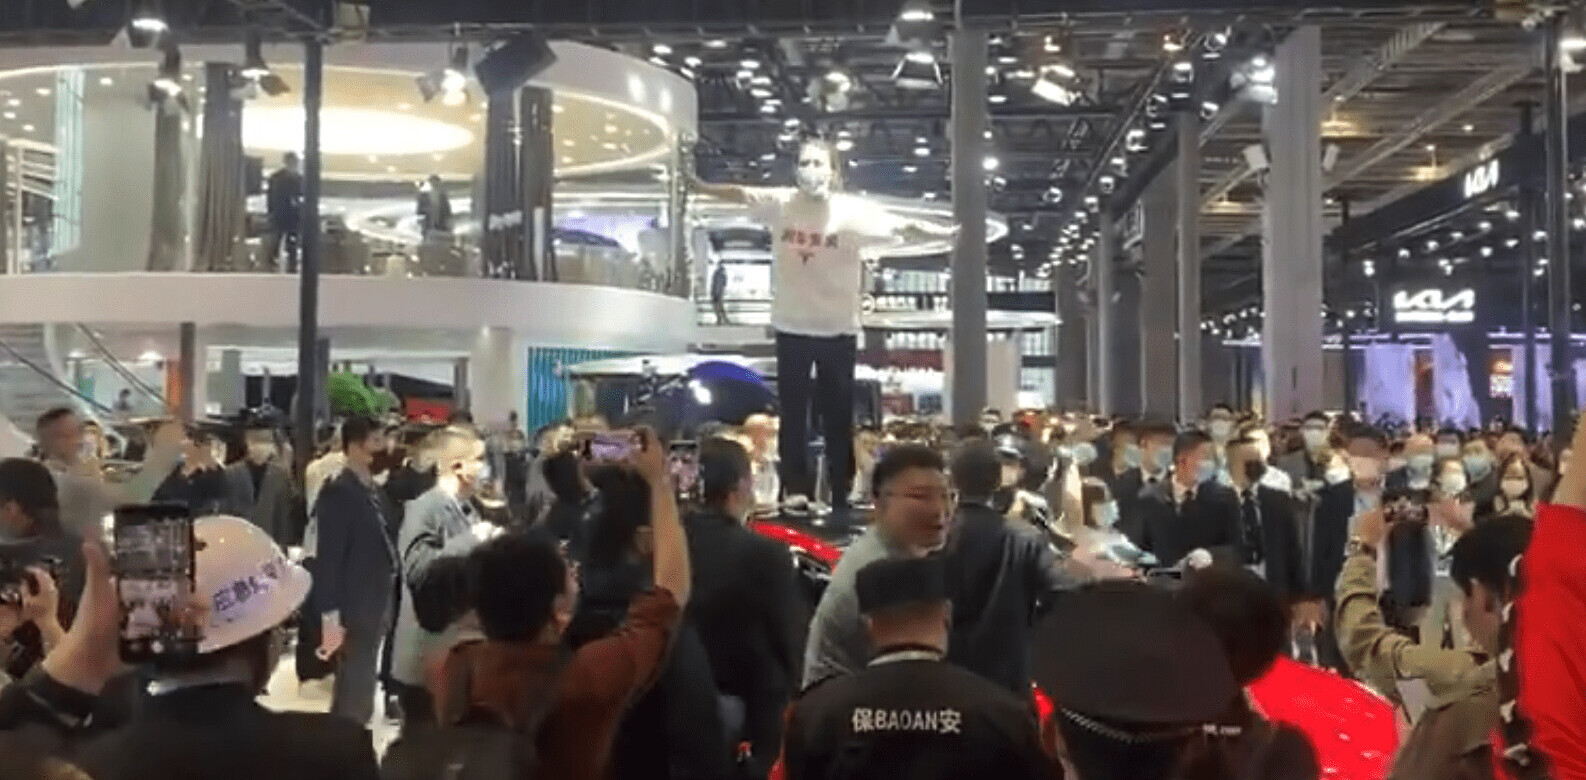 Tesla faces protesters over brake failures at Auto Shanghai